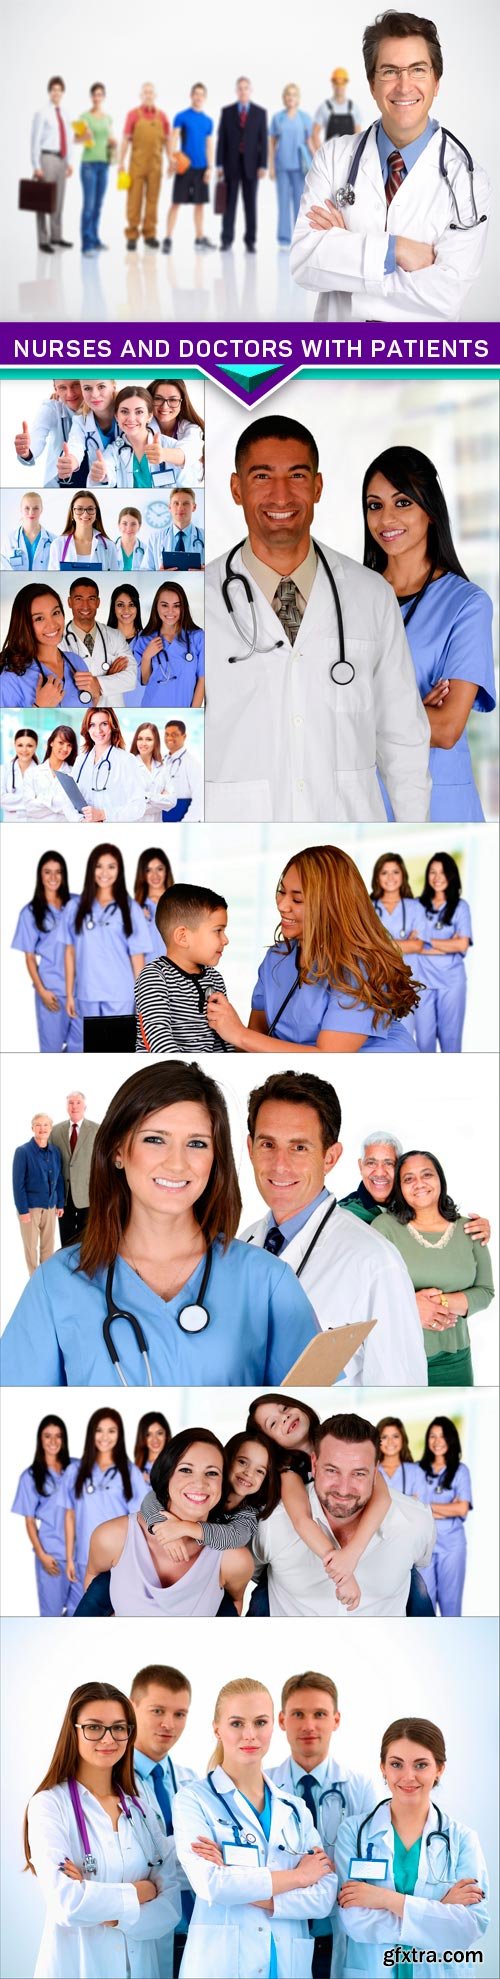 Nurses and doctors with patients 10x JPEG